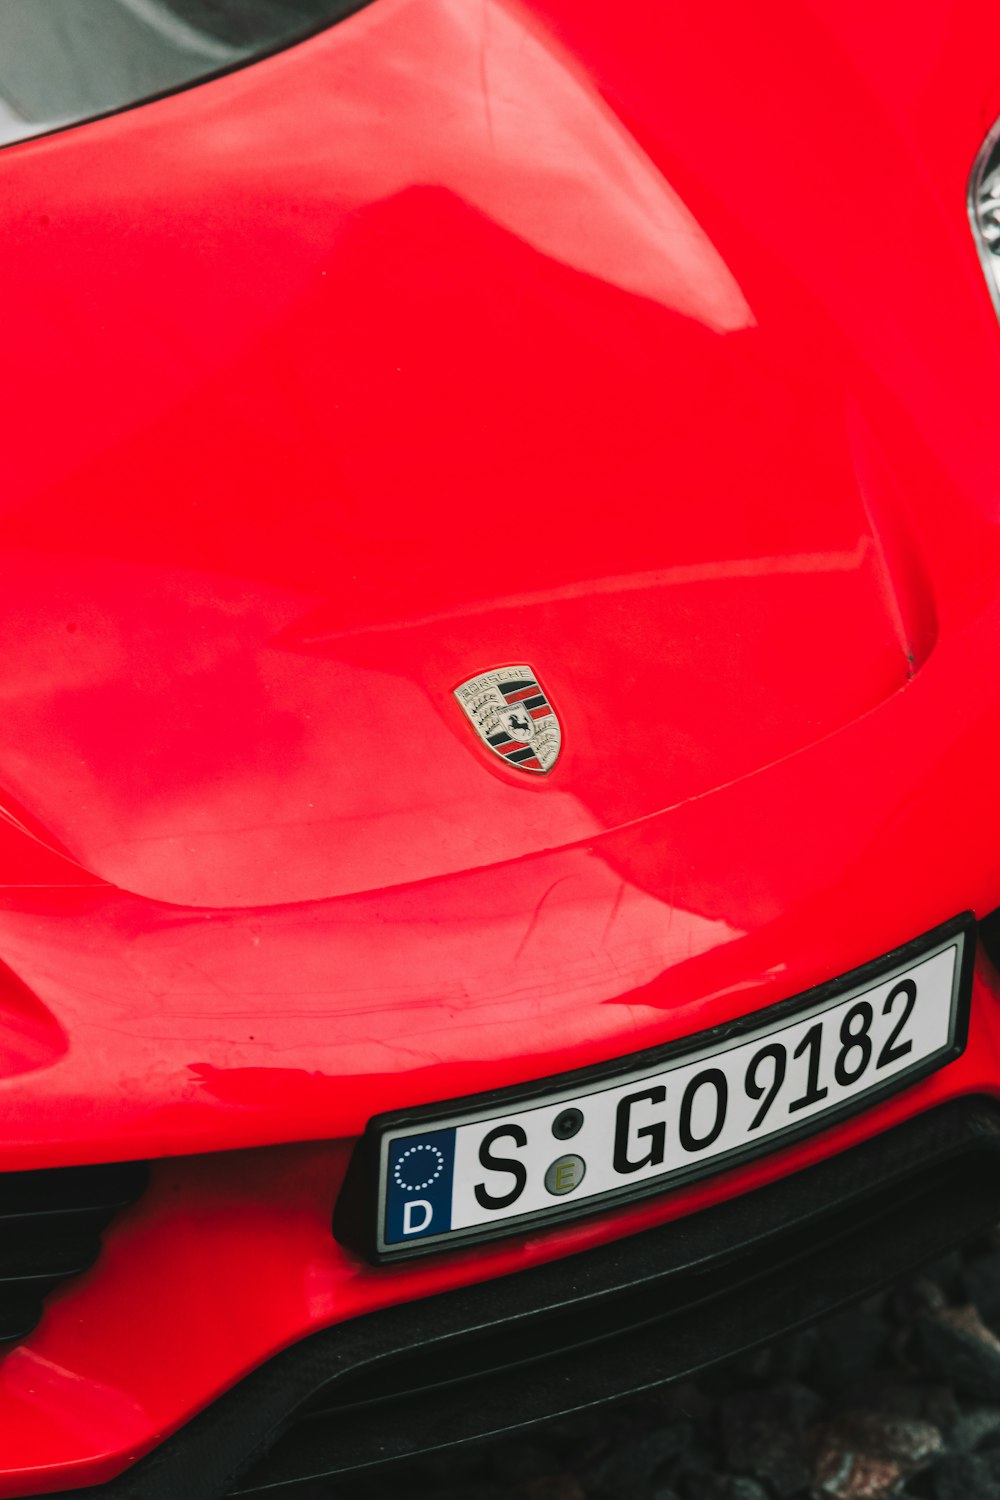 a close up of a red sports car